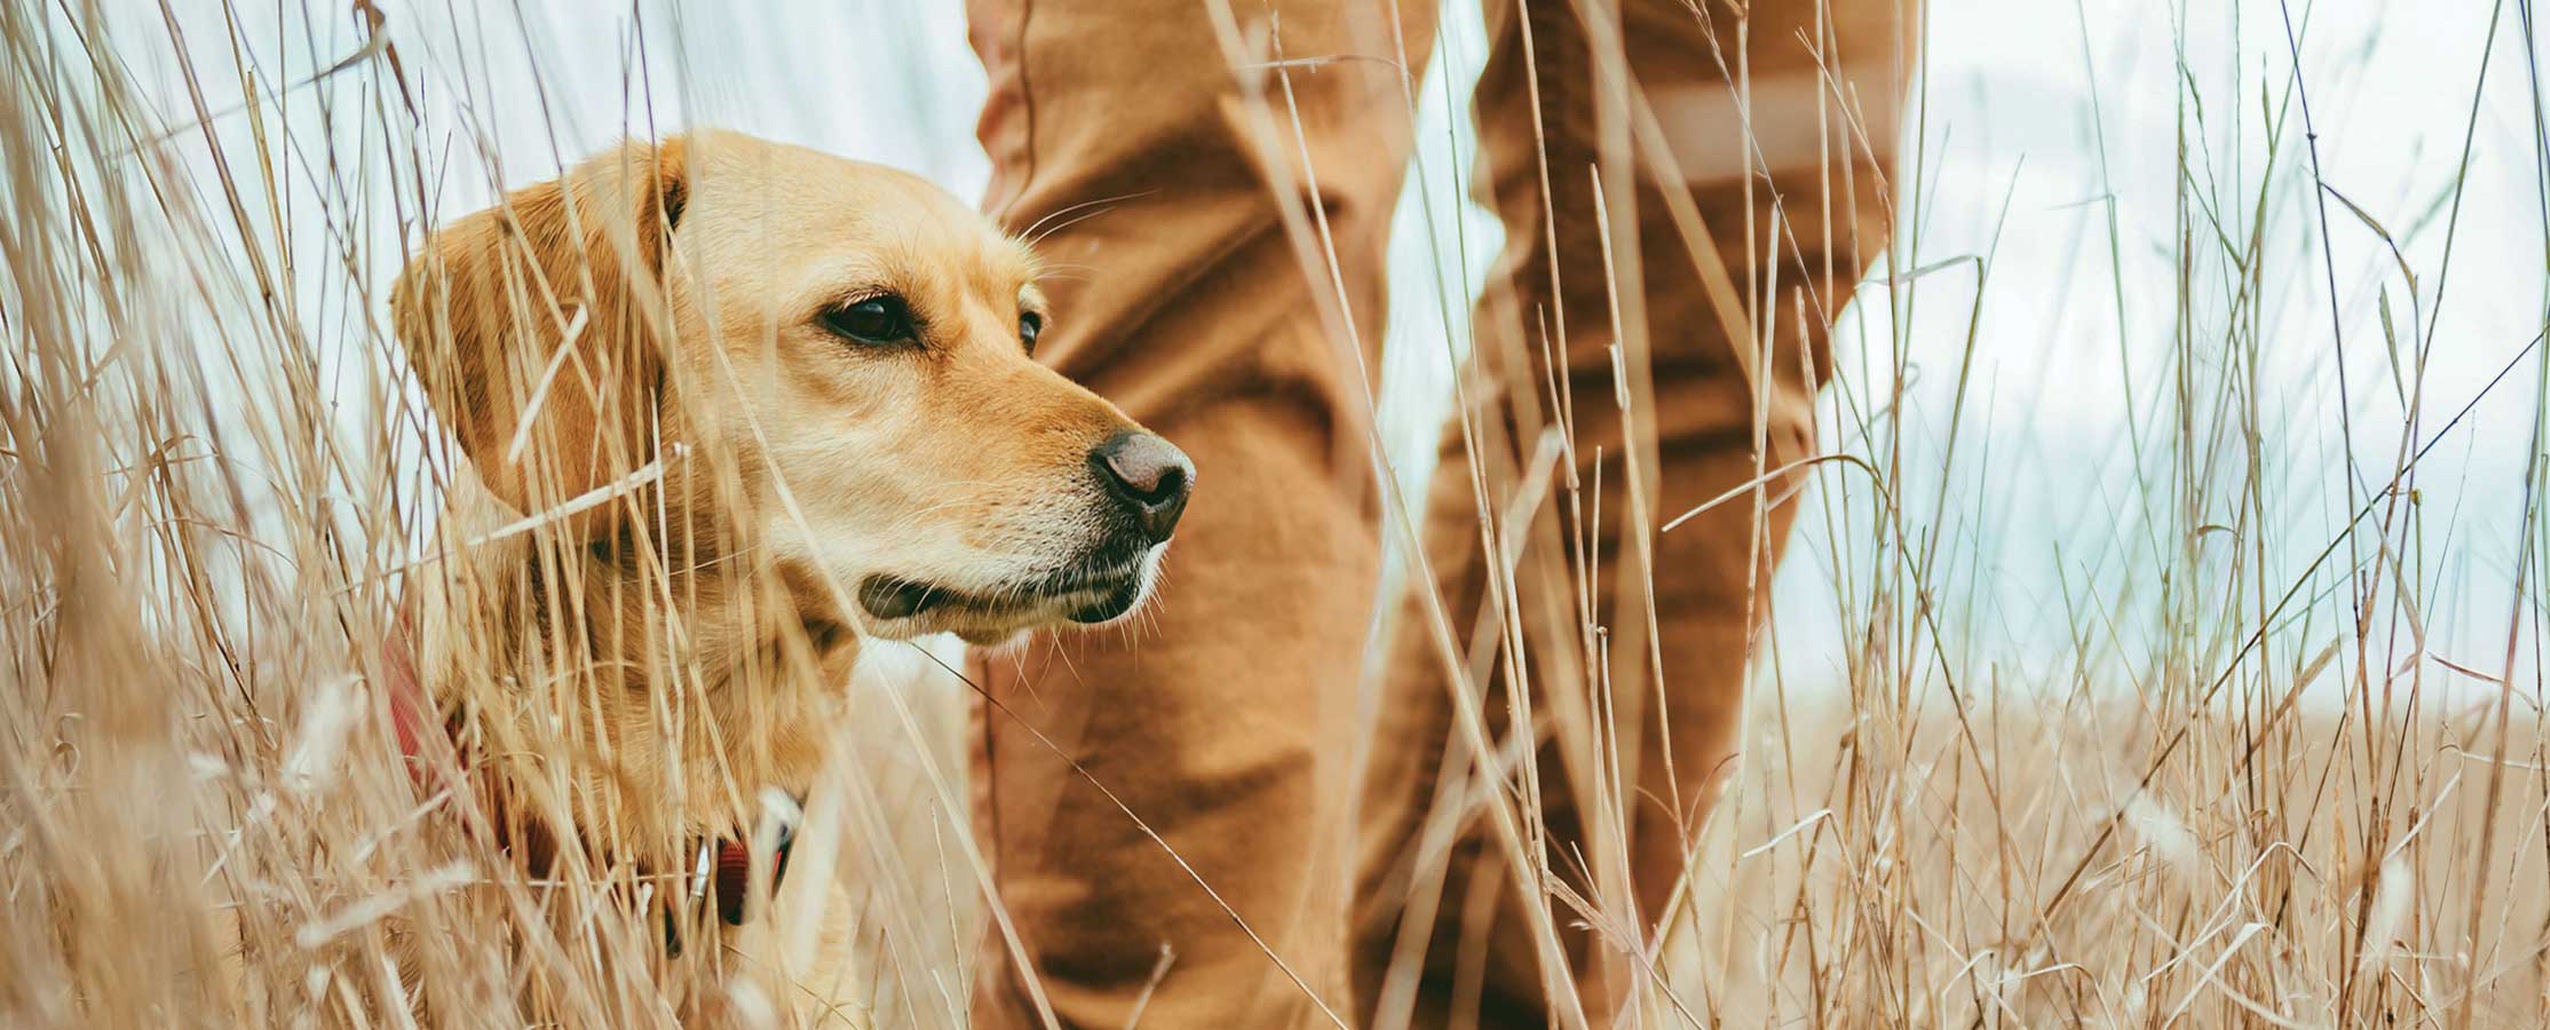 Yellow lab in front of person's legs in field